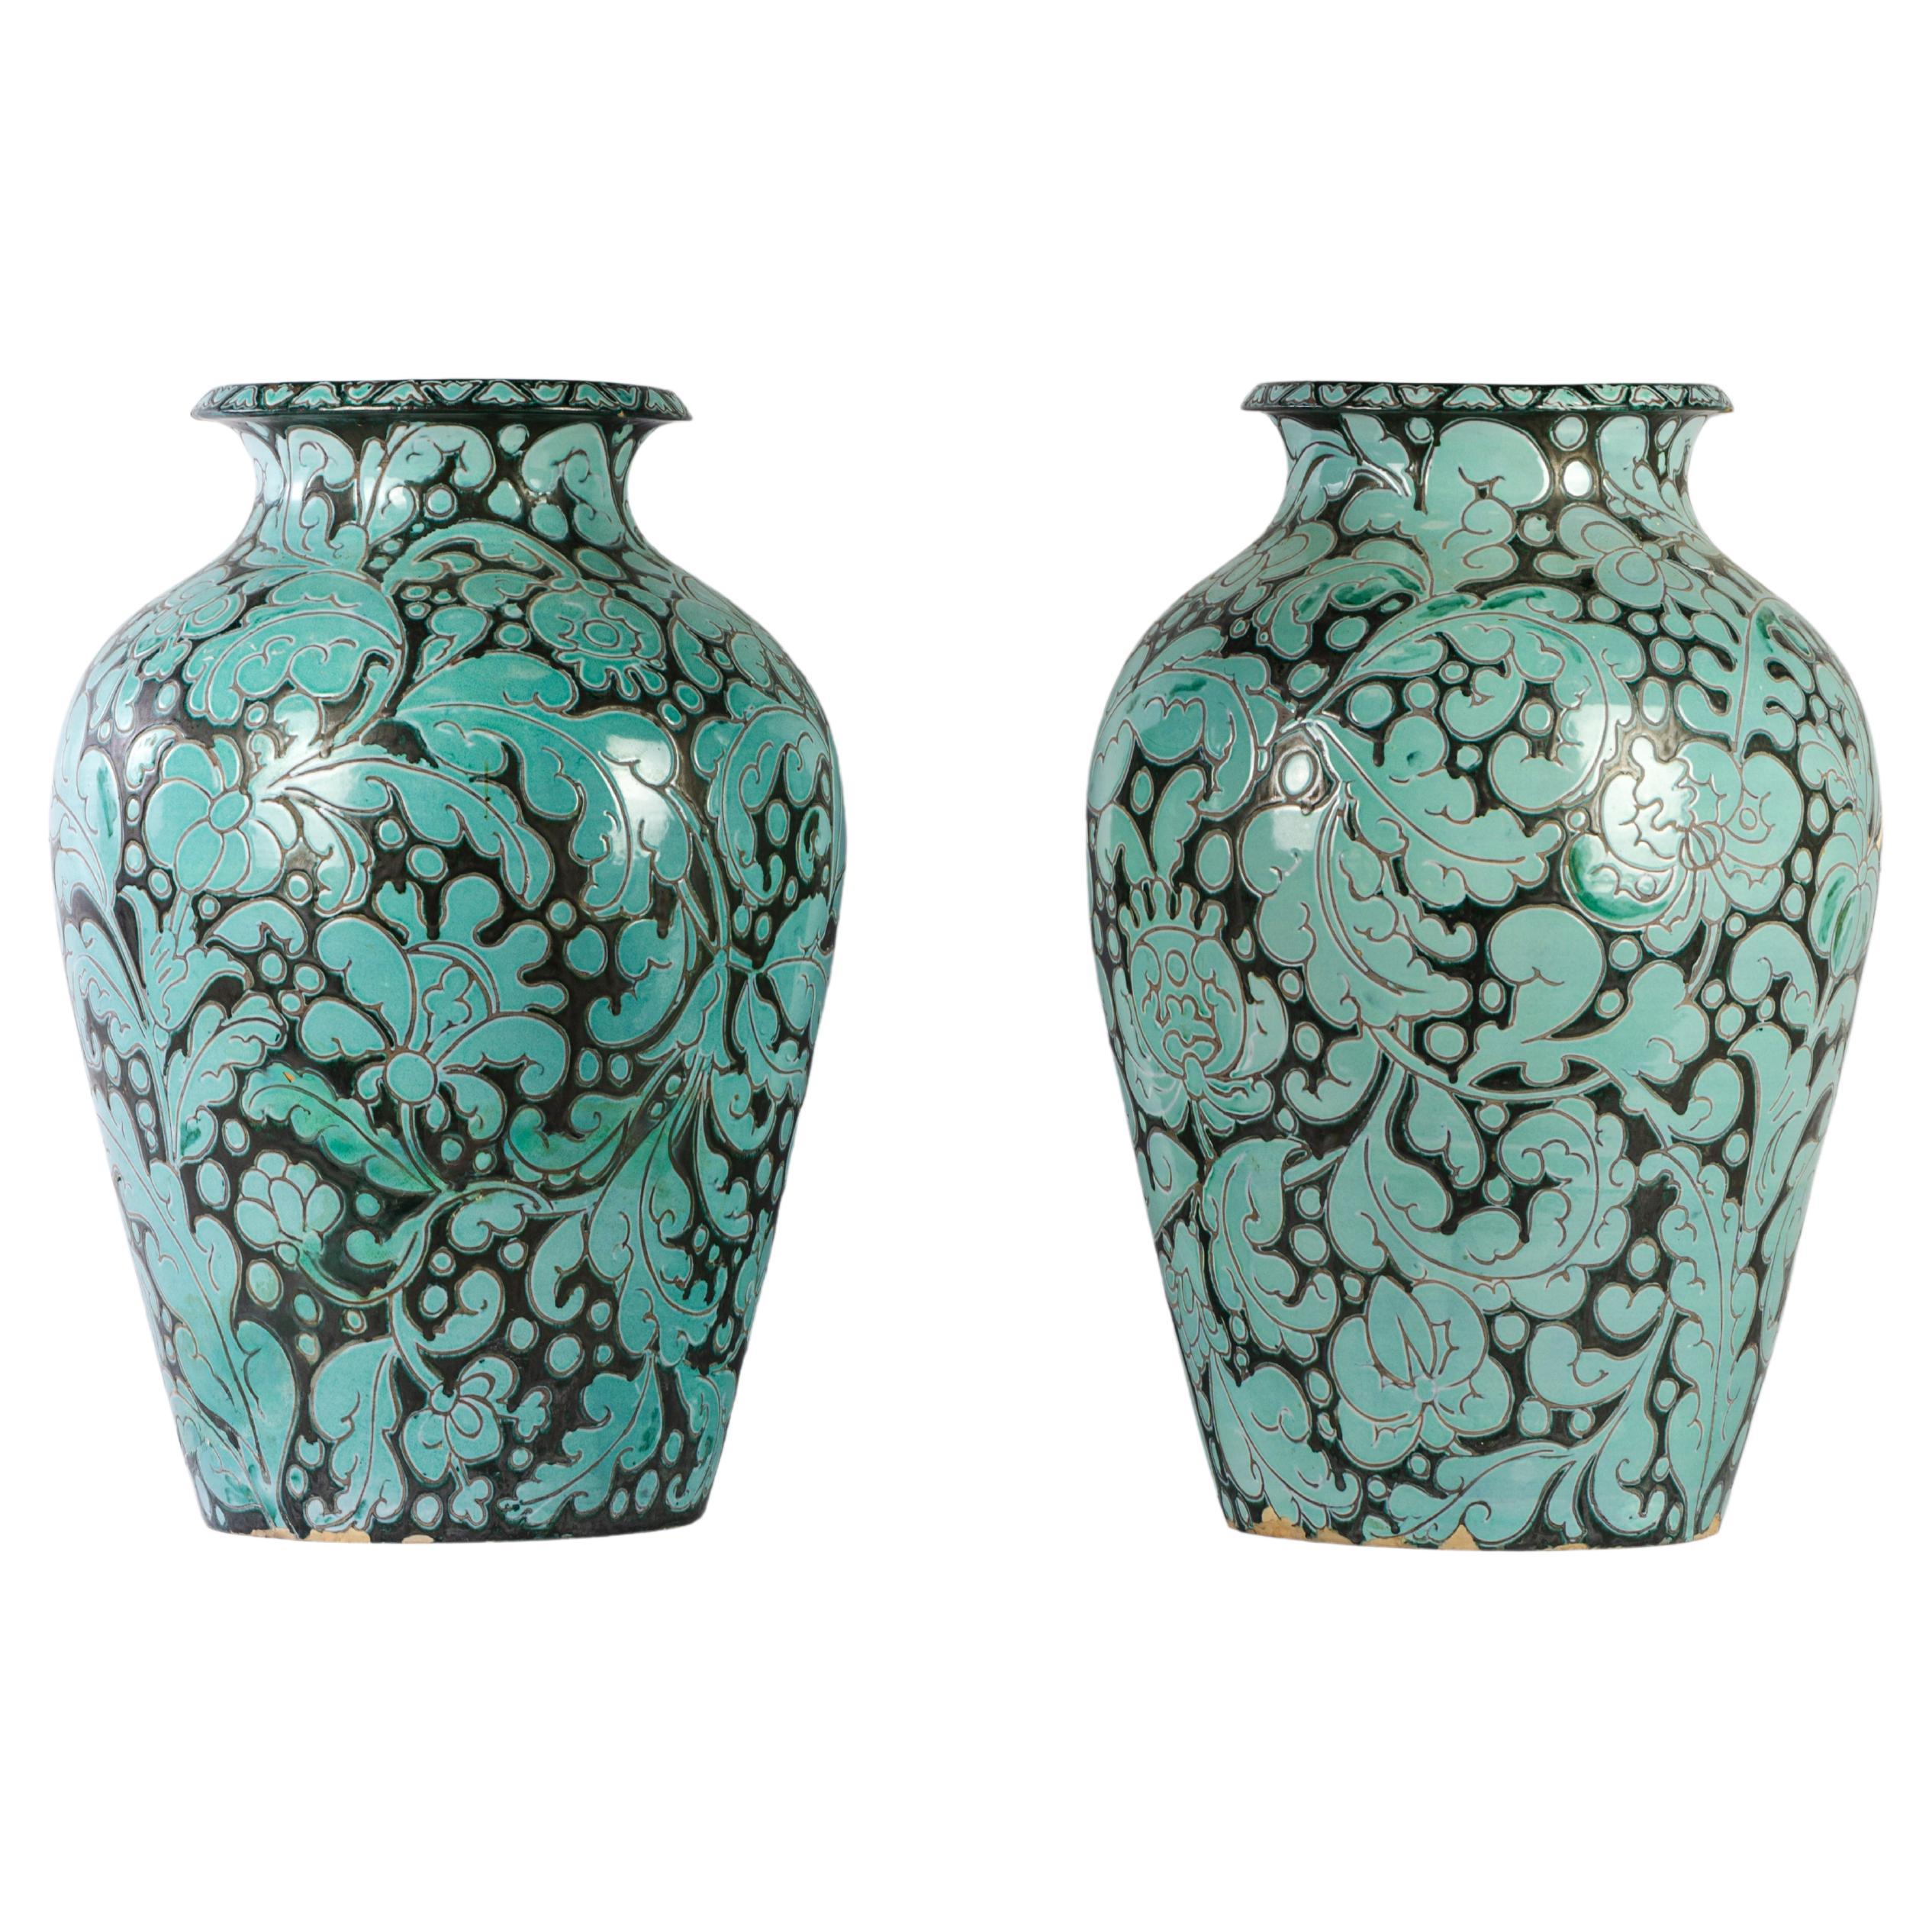 Pair of impressive blue and black vases with floral pattern